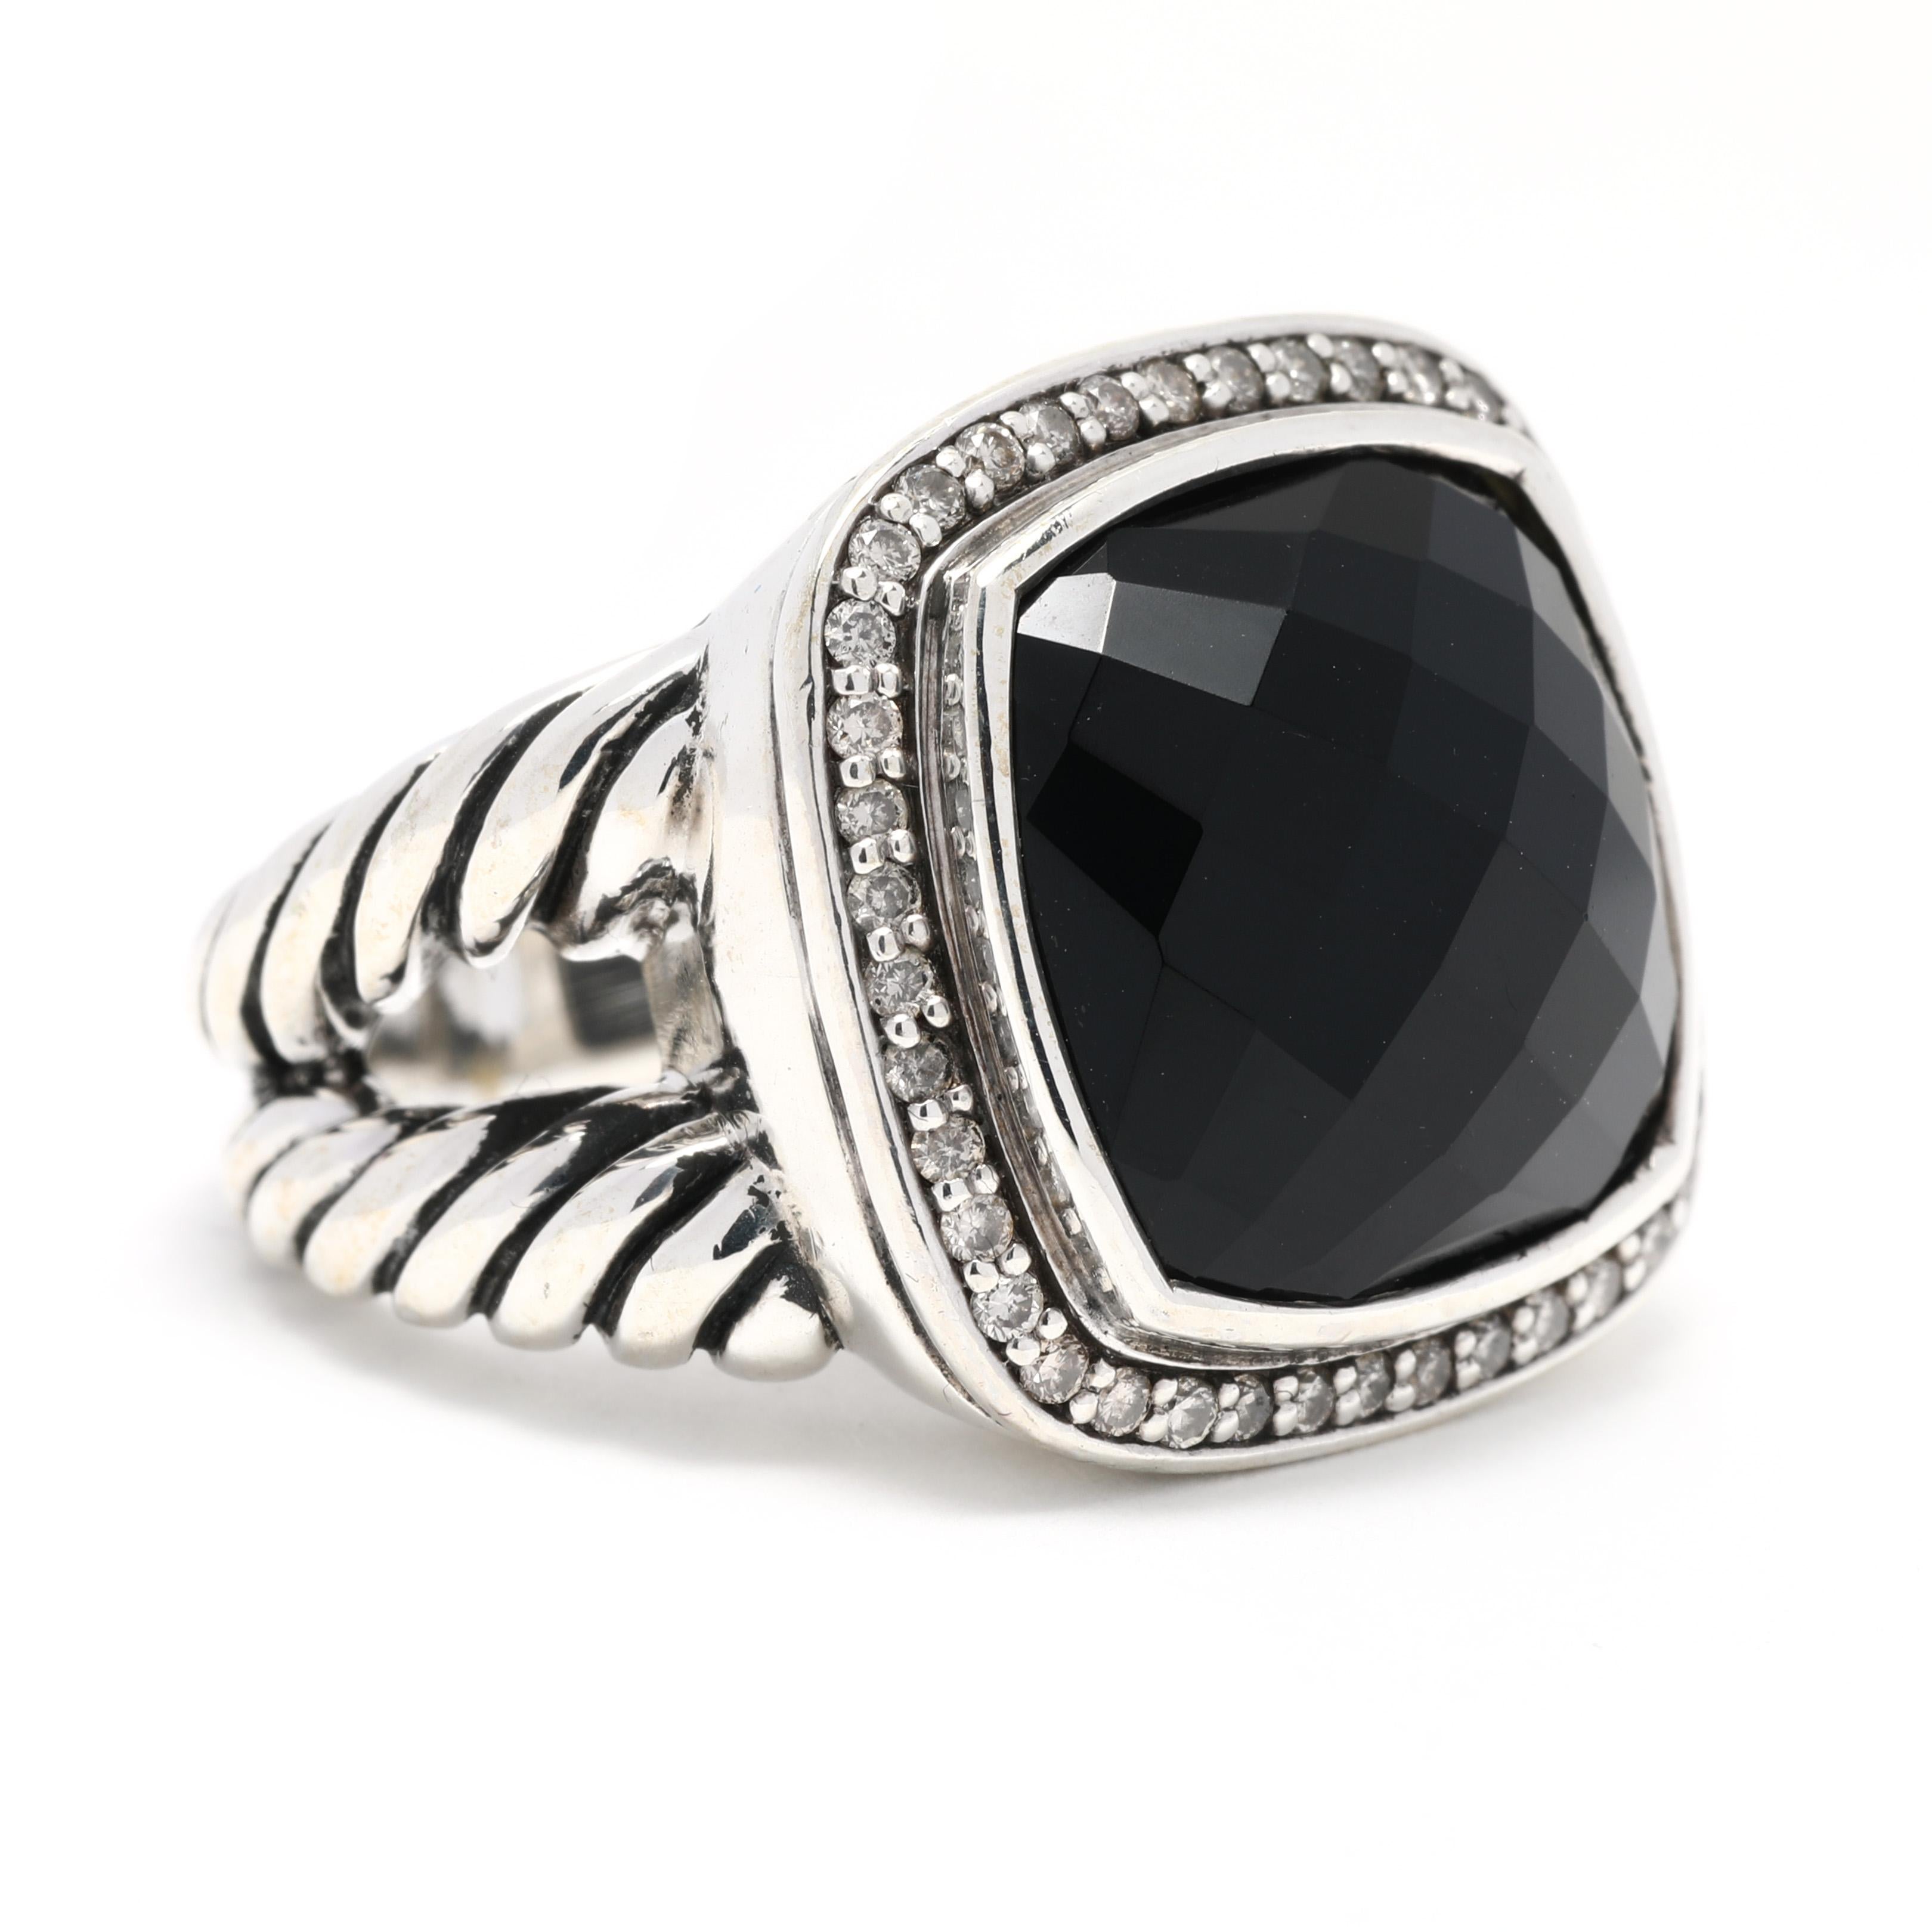 This stunning David Yurman Albion Ring is crafted from 925 Sterling Silver and features a large, faceted black onyx gemstone center accented with .31ctw of sparkling round diamonds. This elegant ring is a size 6 and will make a beautiful statement